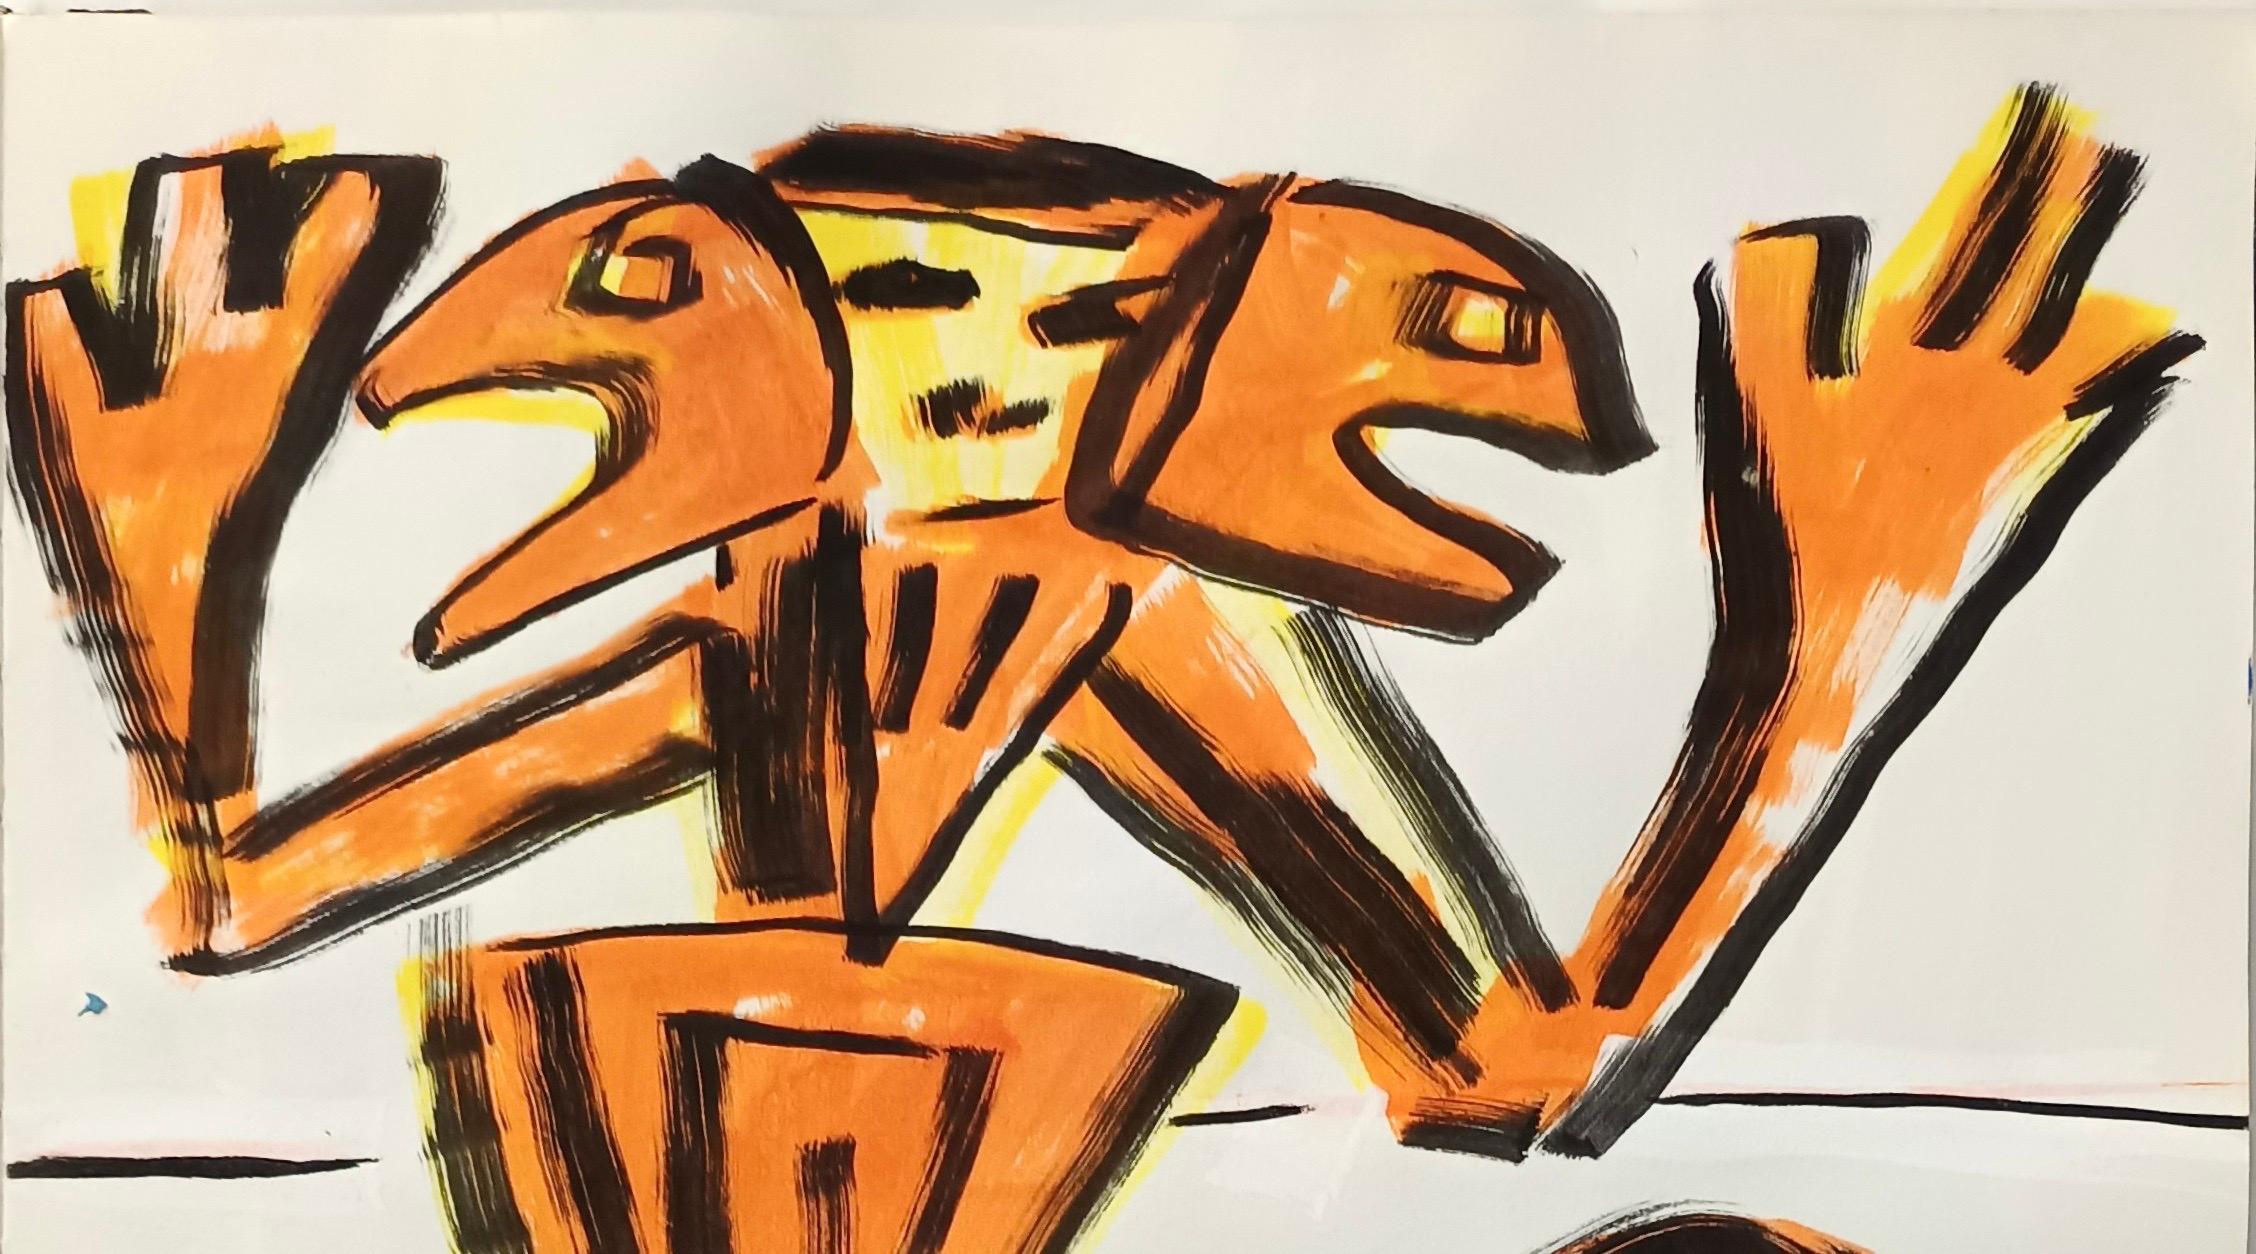 Untitled by E. Wenk, 2020 - 2021 - Orange and Yellow Acrylic, NeoExpressionism - Painting by Enzio Wenk